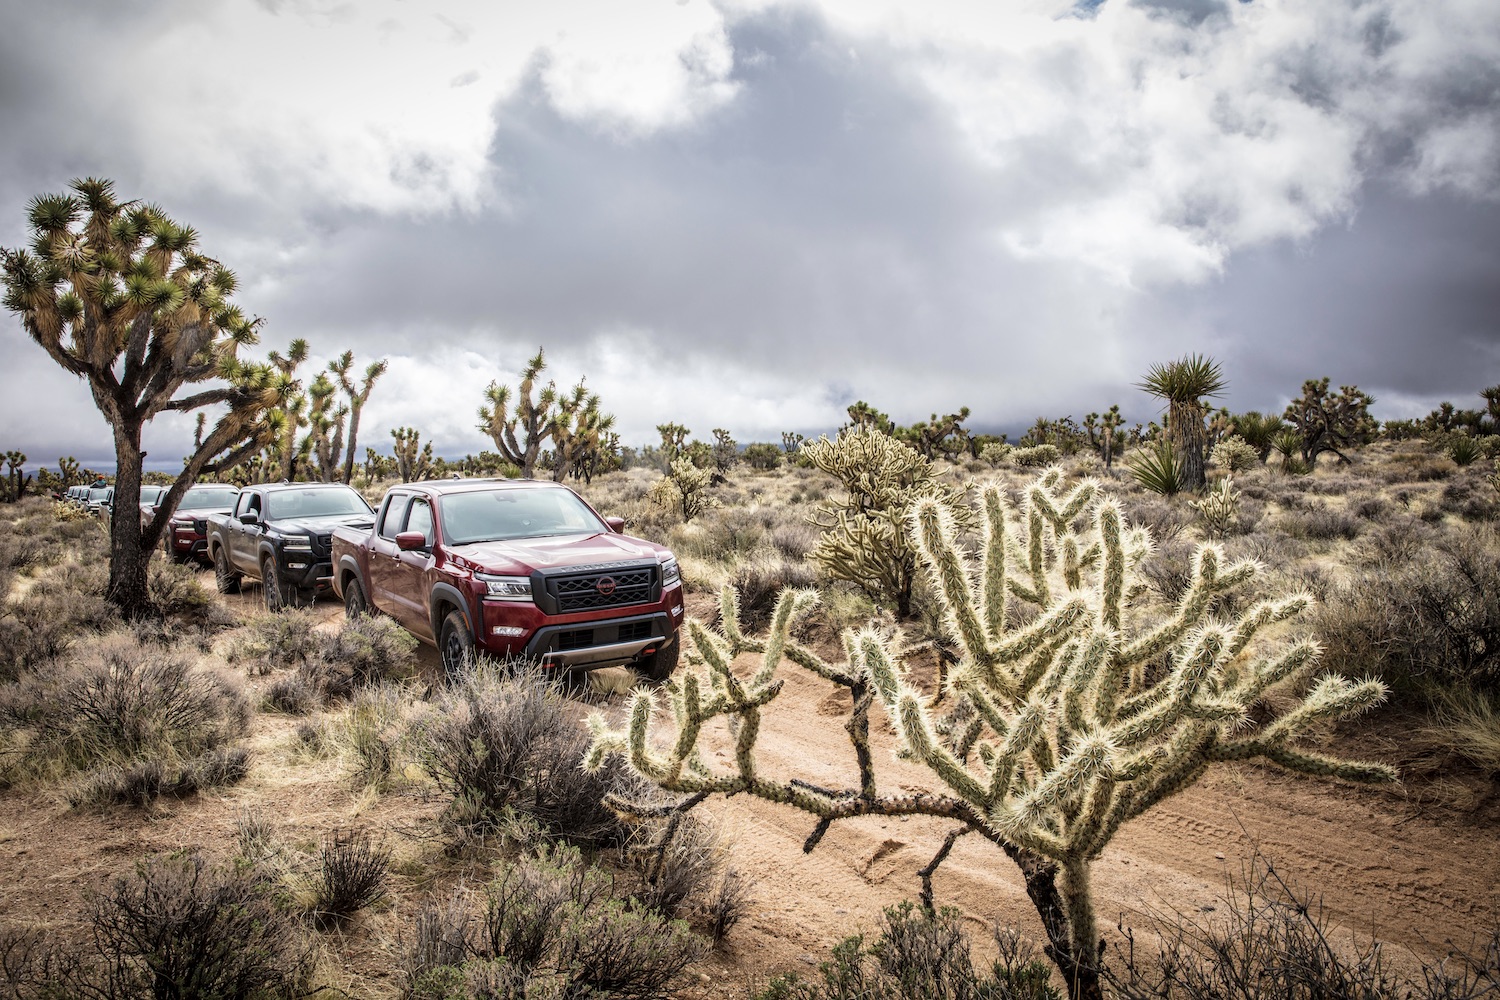 2022 Nissan Frontier Pro-4X on a dirt trail in front of Joshua trees in the desert.